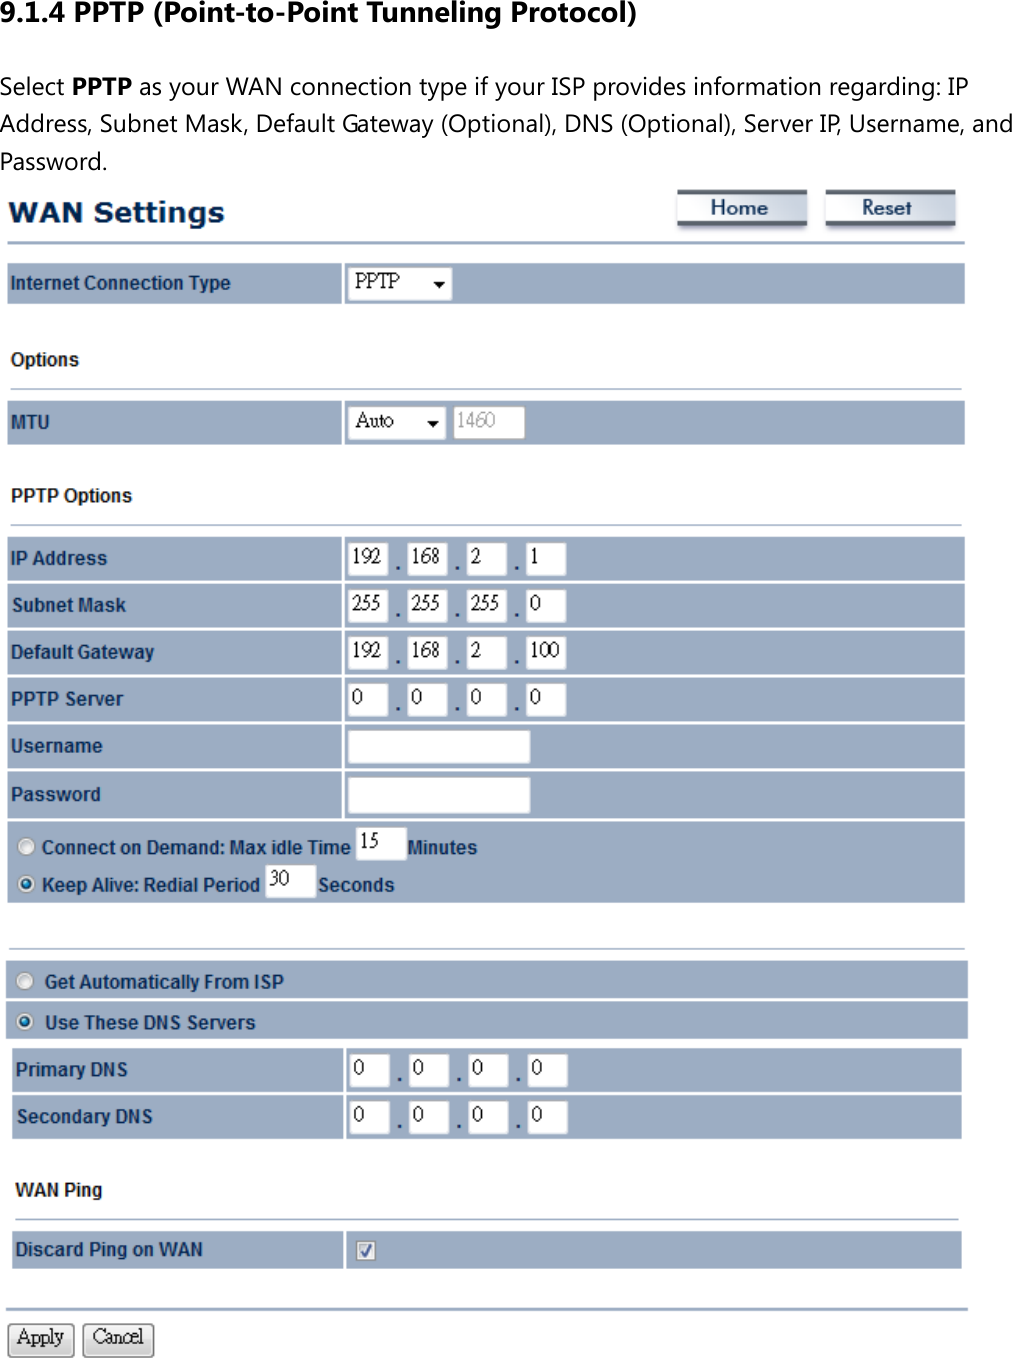 9.1.4 PPTP (Point-to-Point Tunneling Protocol) Select PPTP as your WAN connection type if your ISP provides information regarding: IP Address, Subnet Mask, Default Gateway (Optional), DNS (Optional), Server IP, Username, and Password.     